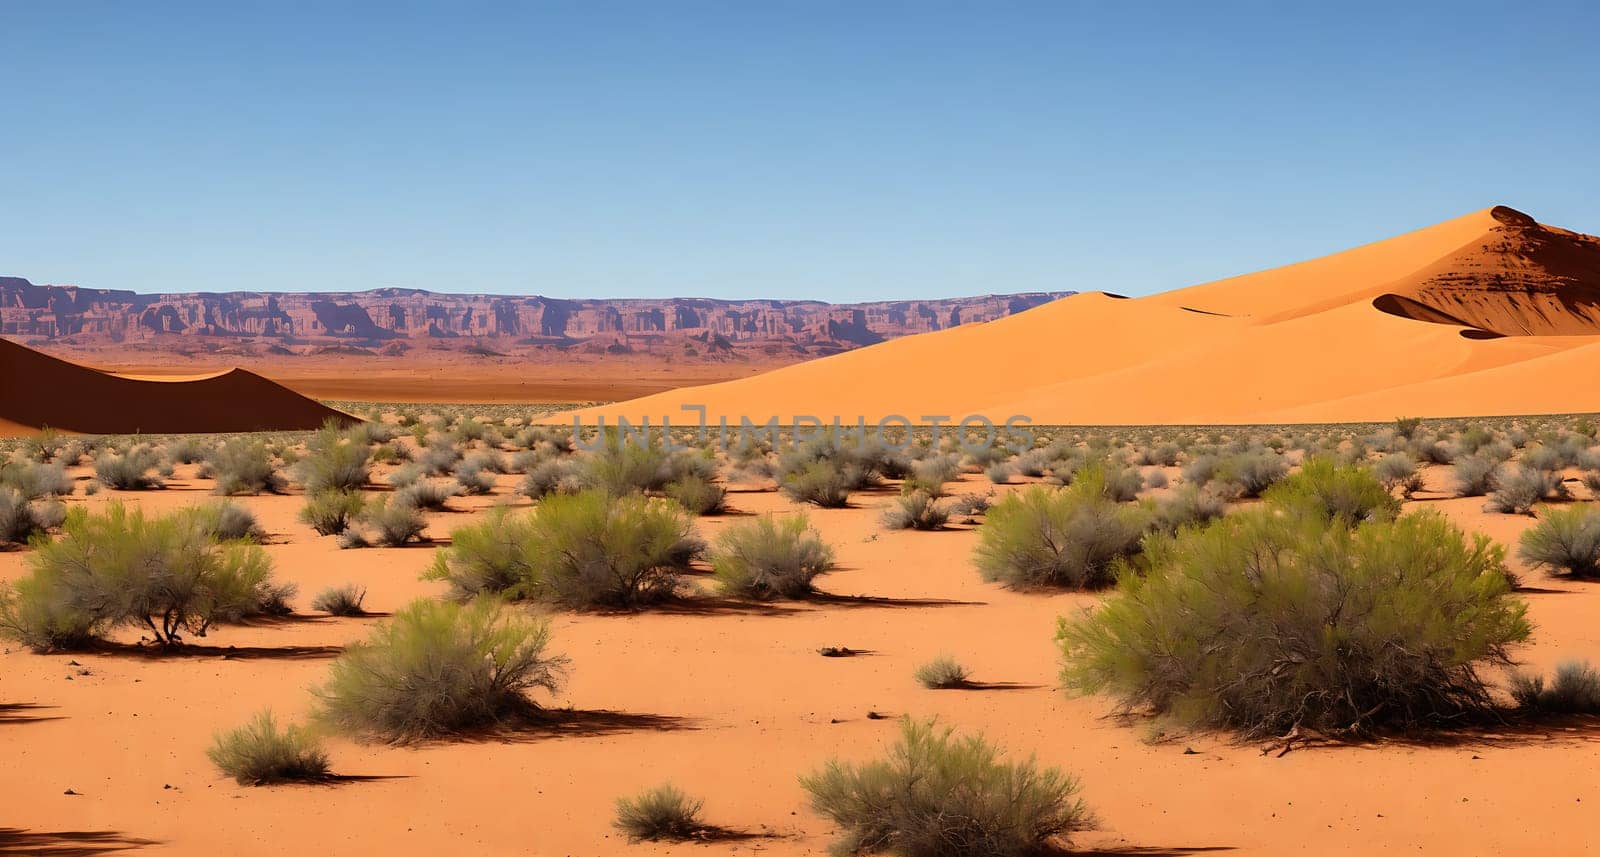 The image shows a vast, arid desert with sand dunes and small shrubs scattered throughout. The sky is clear and blue.